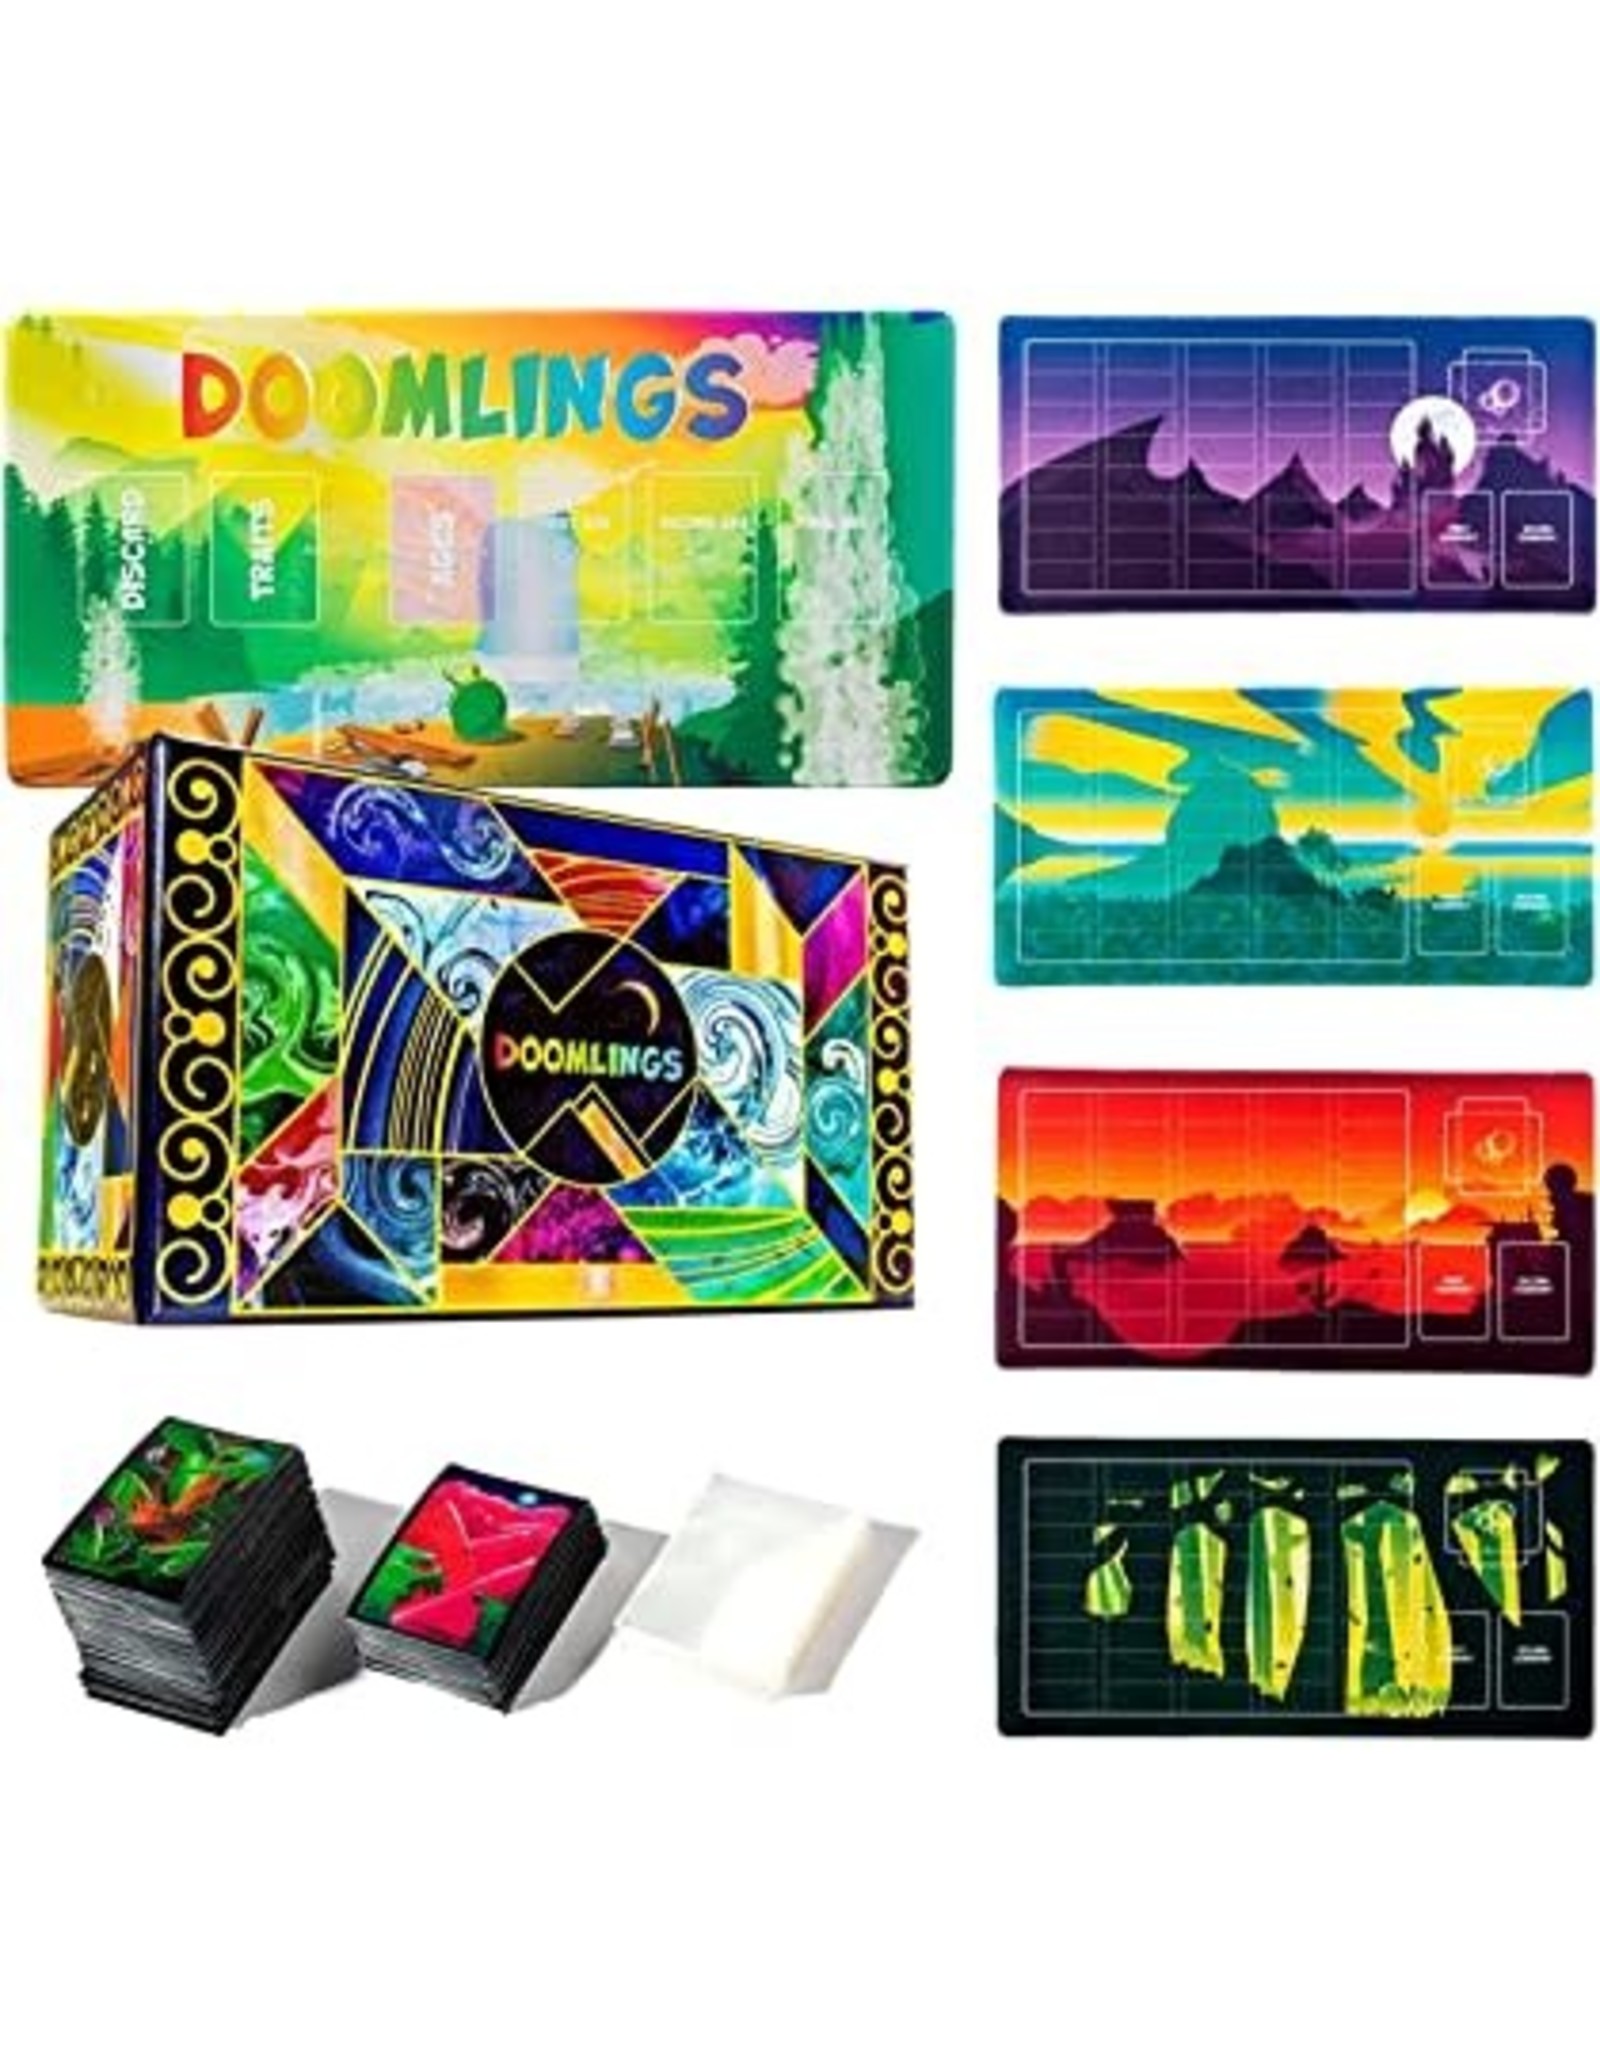 Doomlings Deluxe Bundle with Play Mat